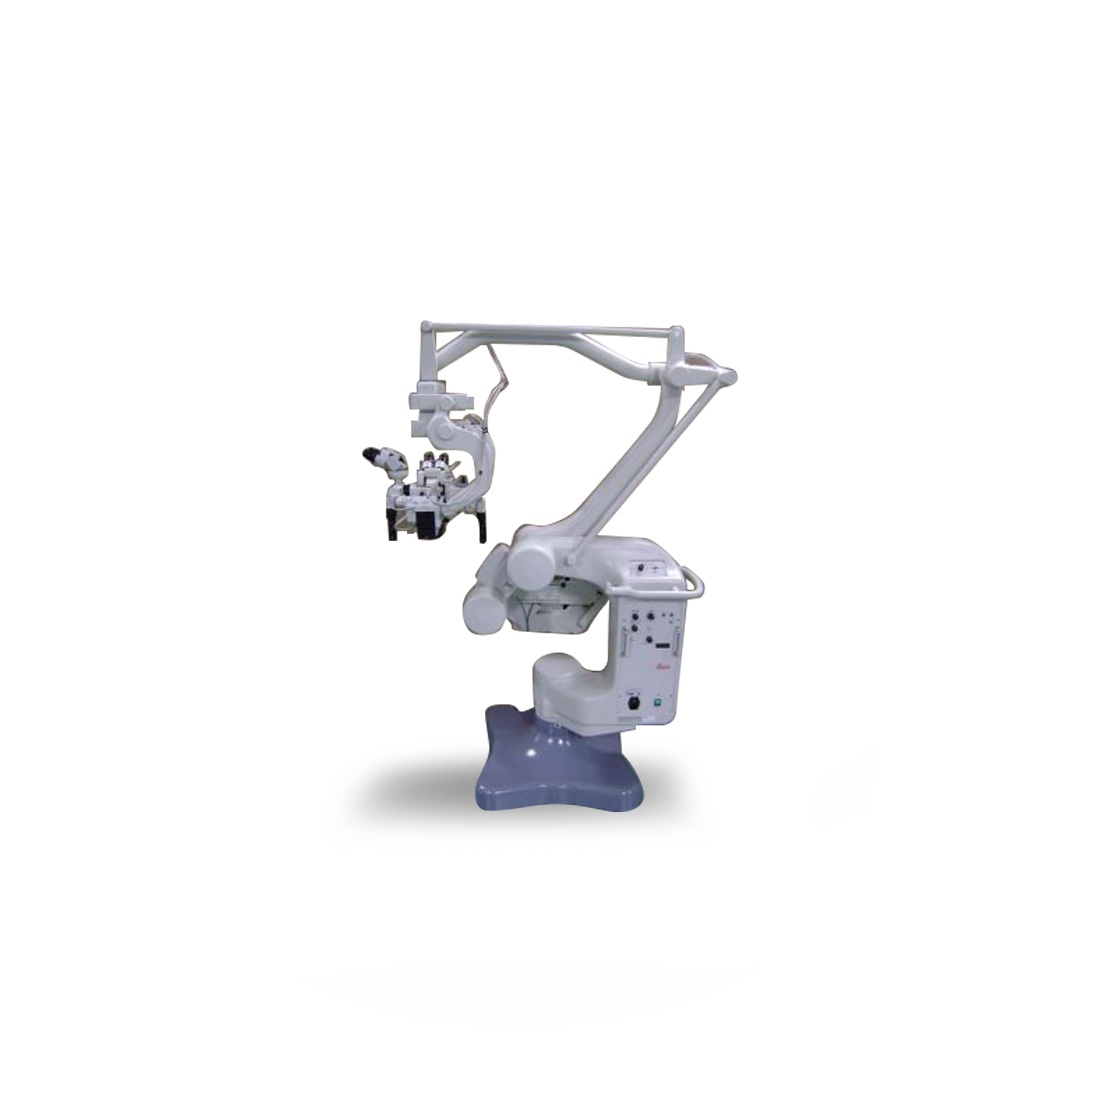 Leica OH1 Surgical Microscope